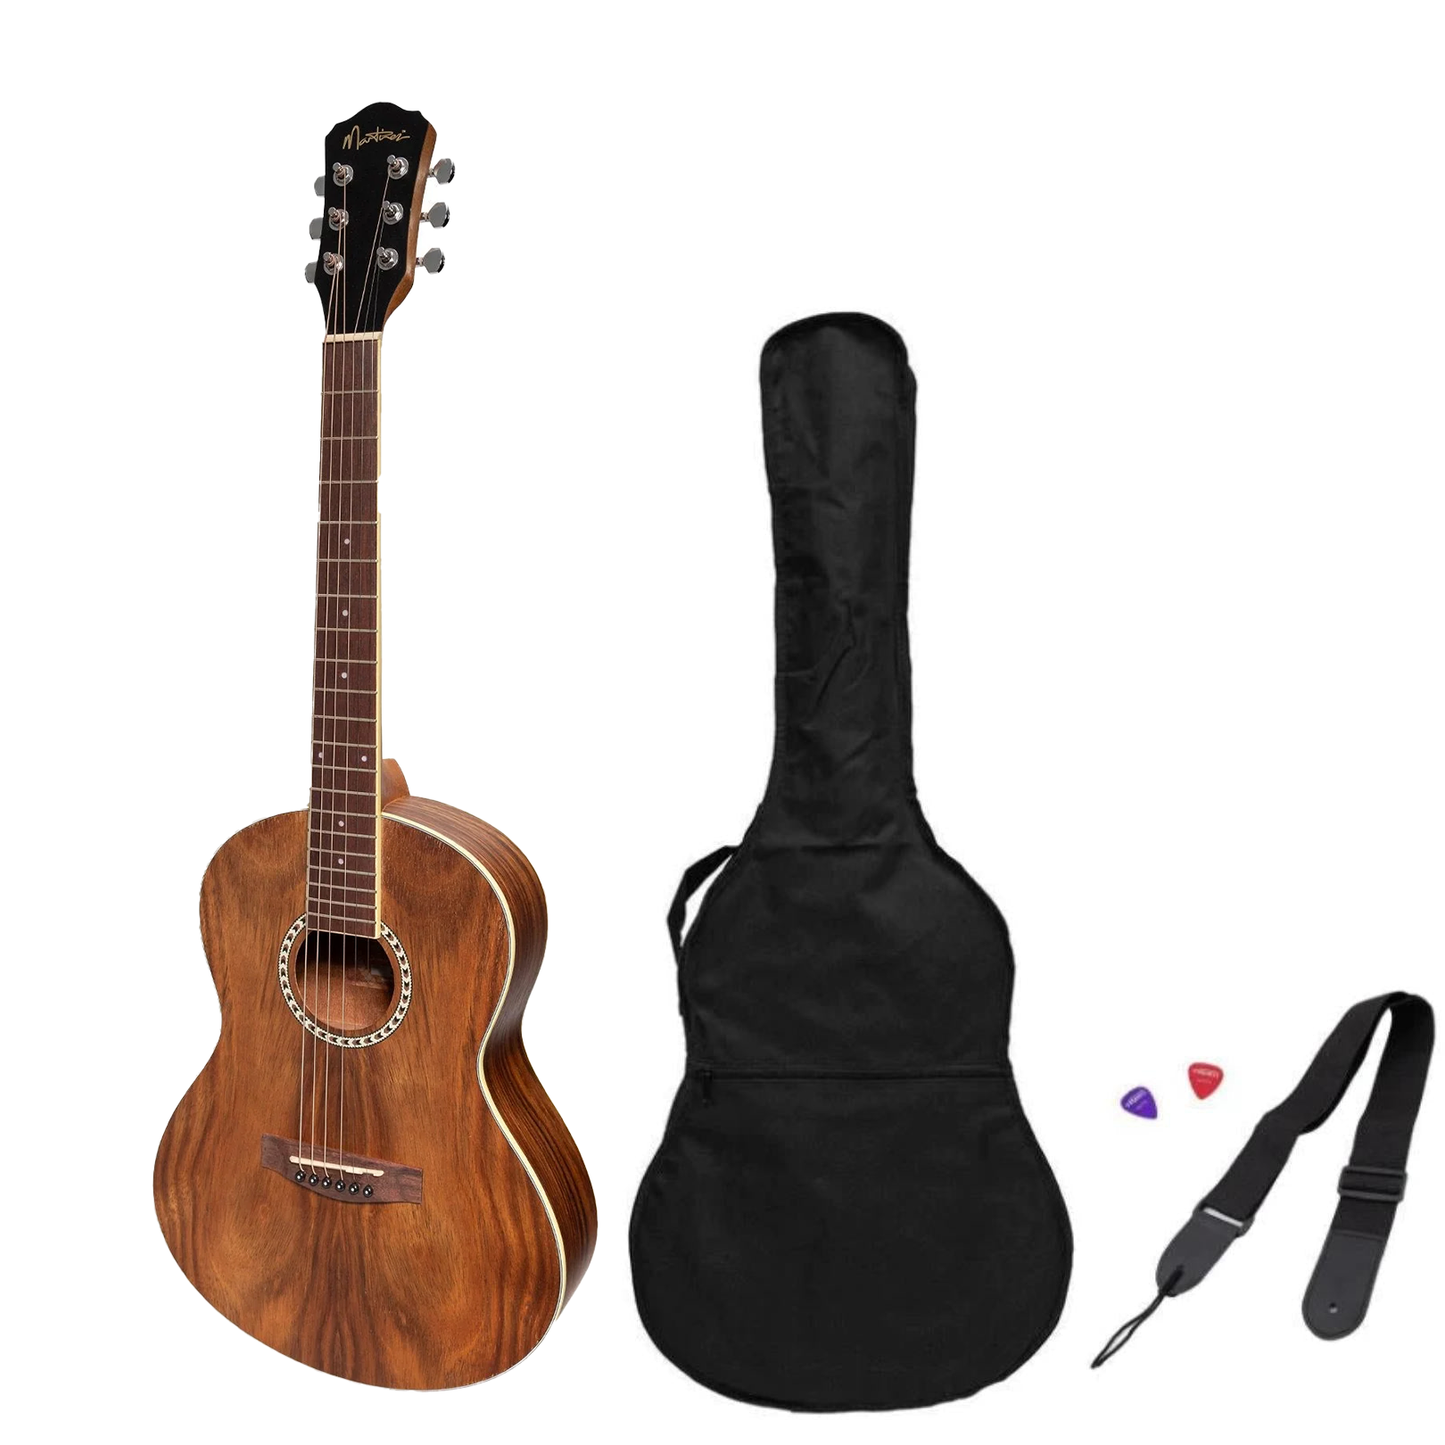 Martinez Acoustic 'Little-Mini' Folk Guitar Pack with Built-In Tuner (RWD)